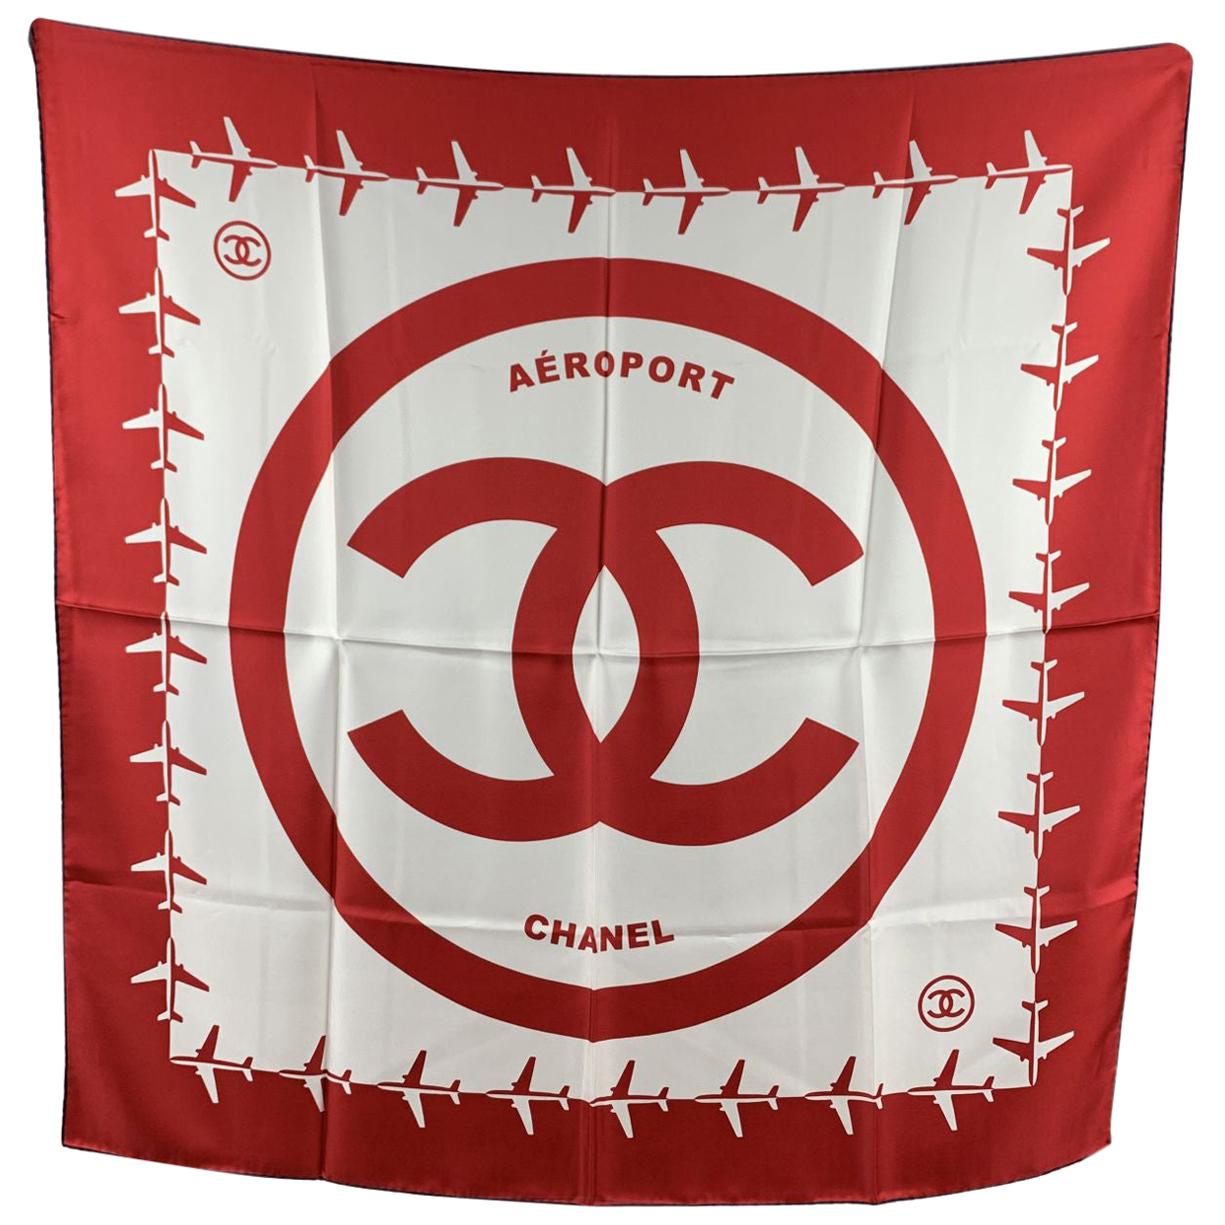 Chanel Red and White Aeroport Airline Silk Scarf CC Logo Print